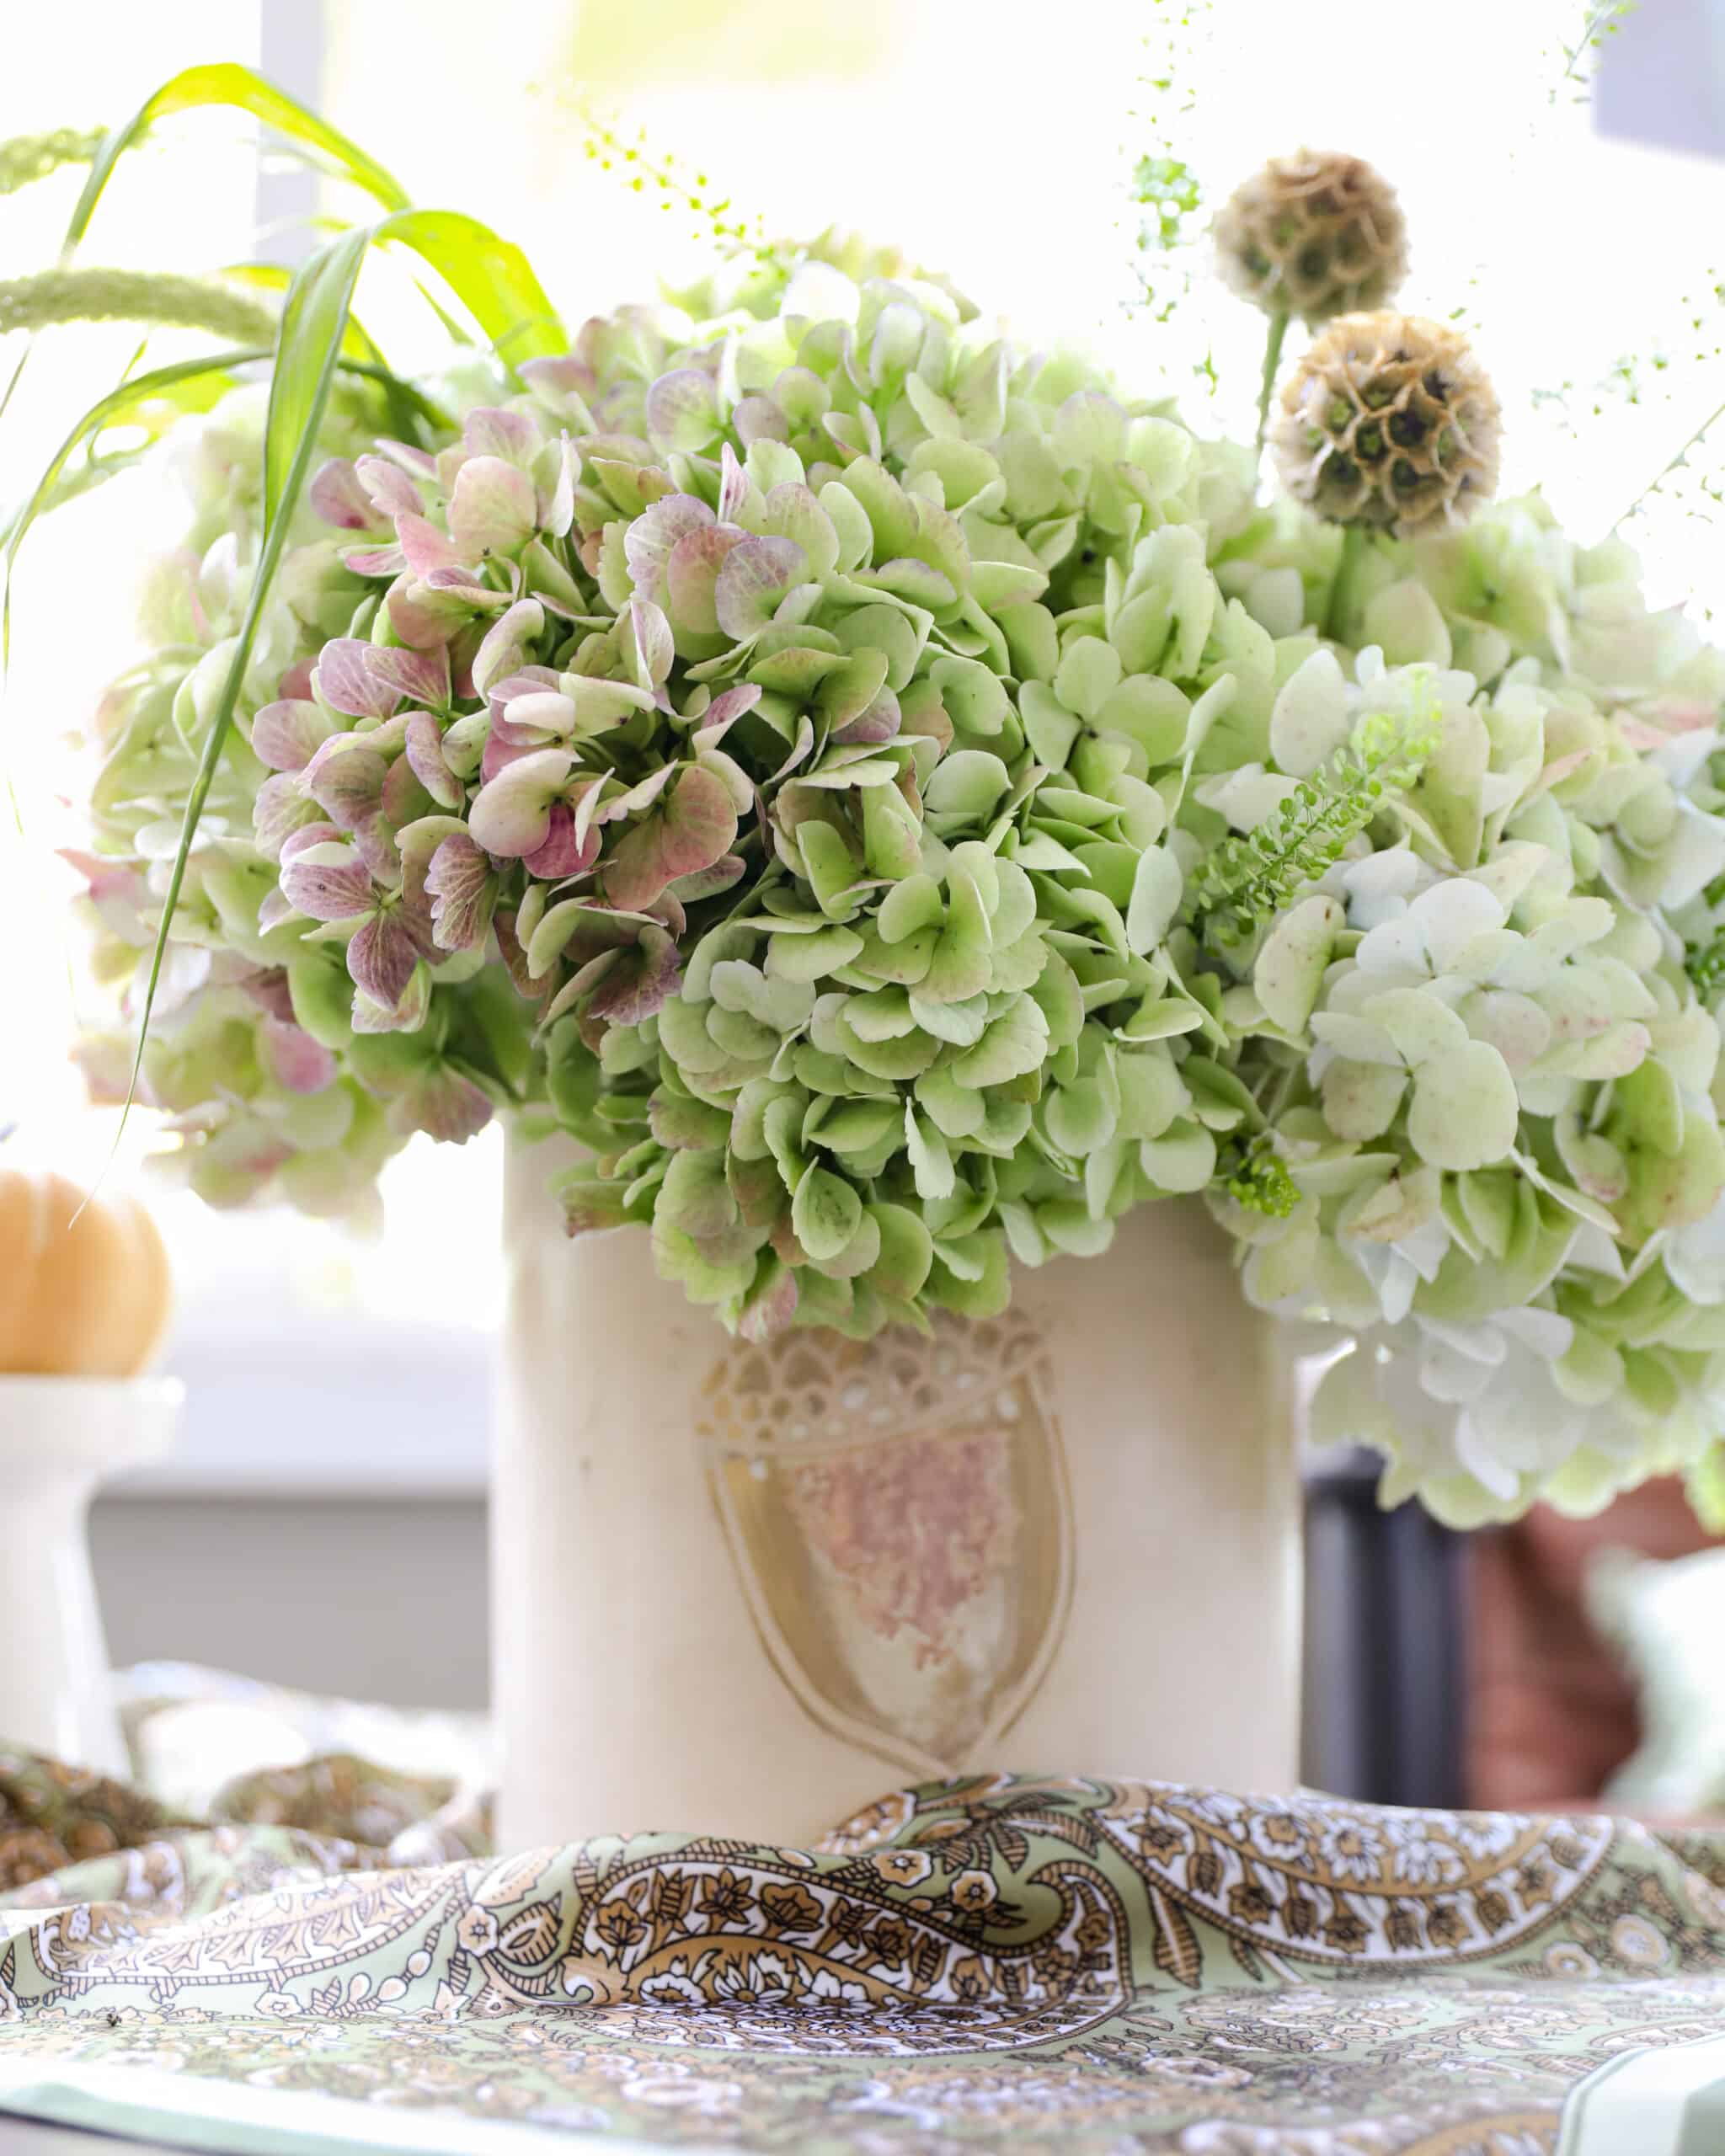 The Scenic Sage arrangement - green hydrangea and other light green and bronw florals in an acorn container